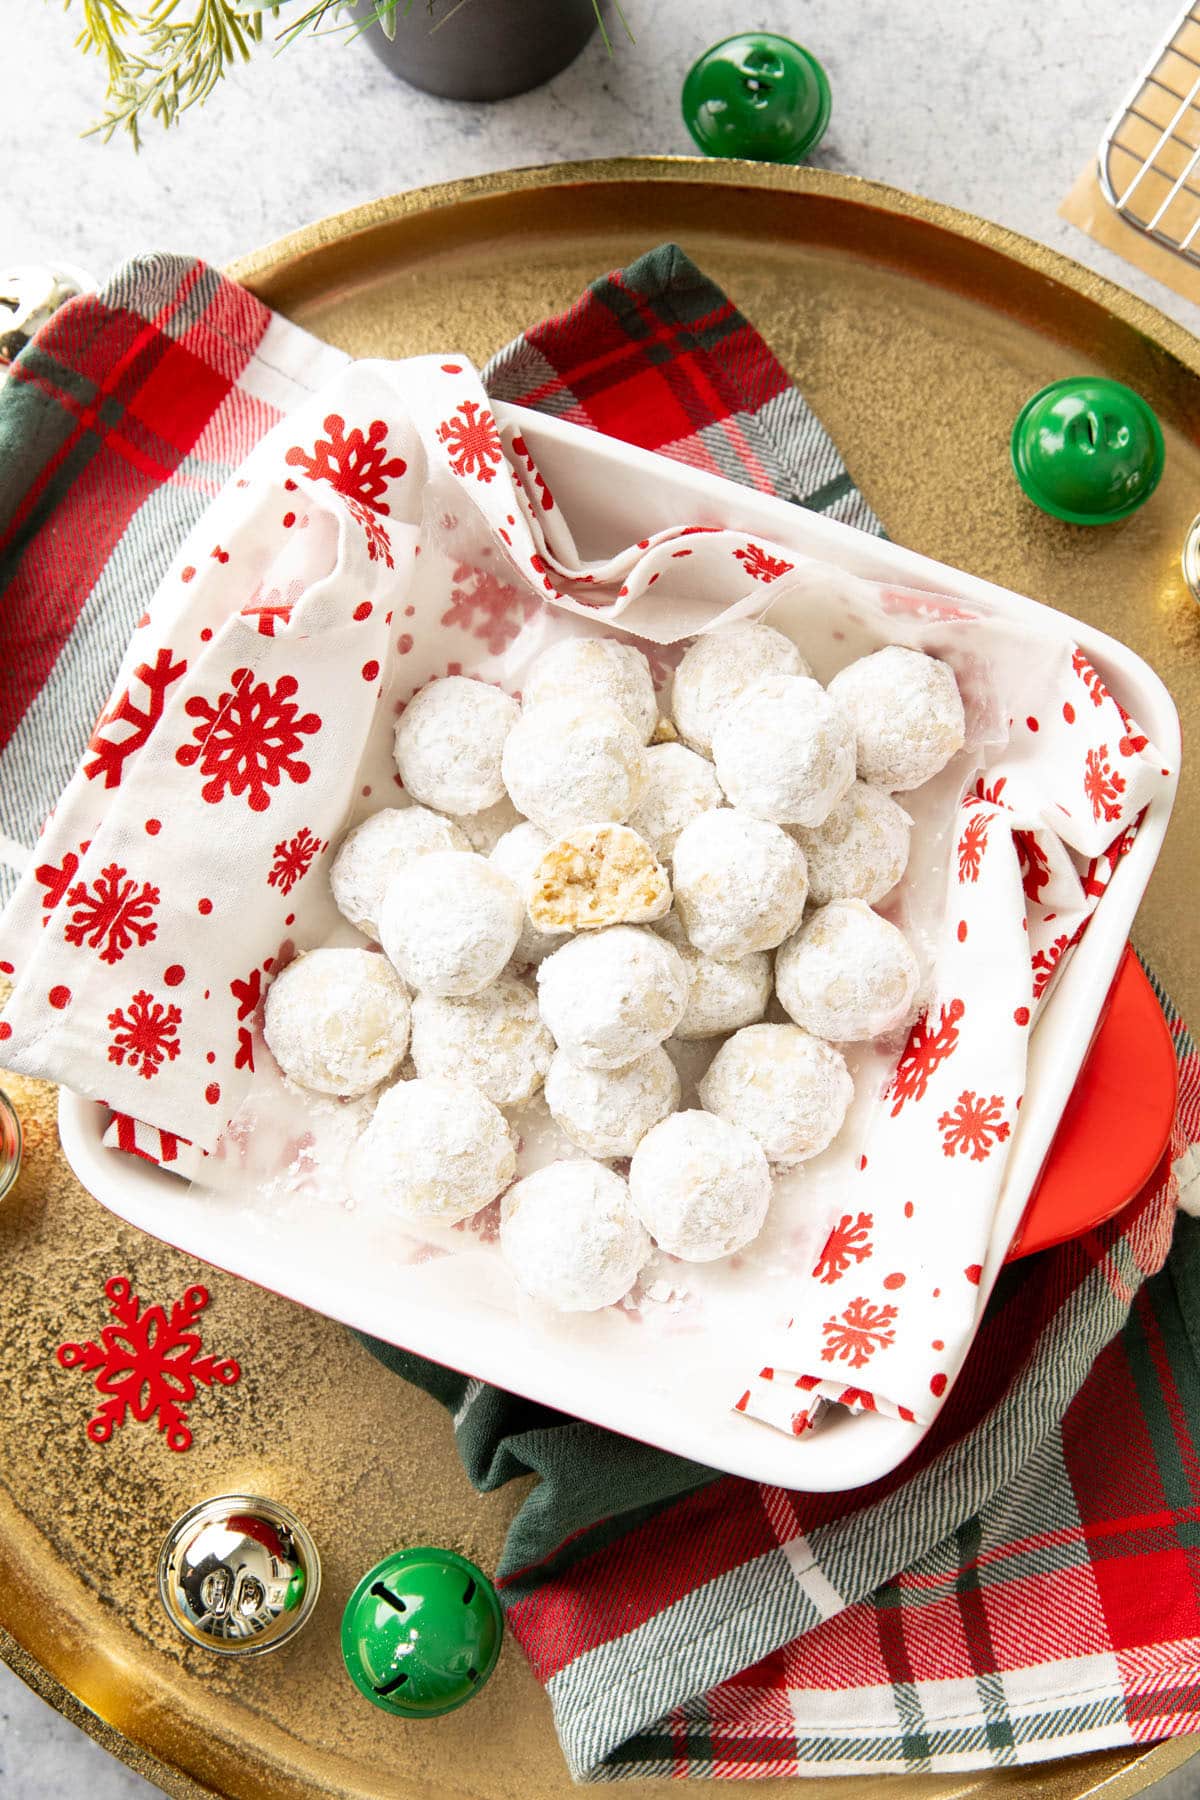 Overhead photo of snowball cookies wrapped red snowflake napkin on a gold tray